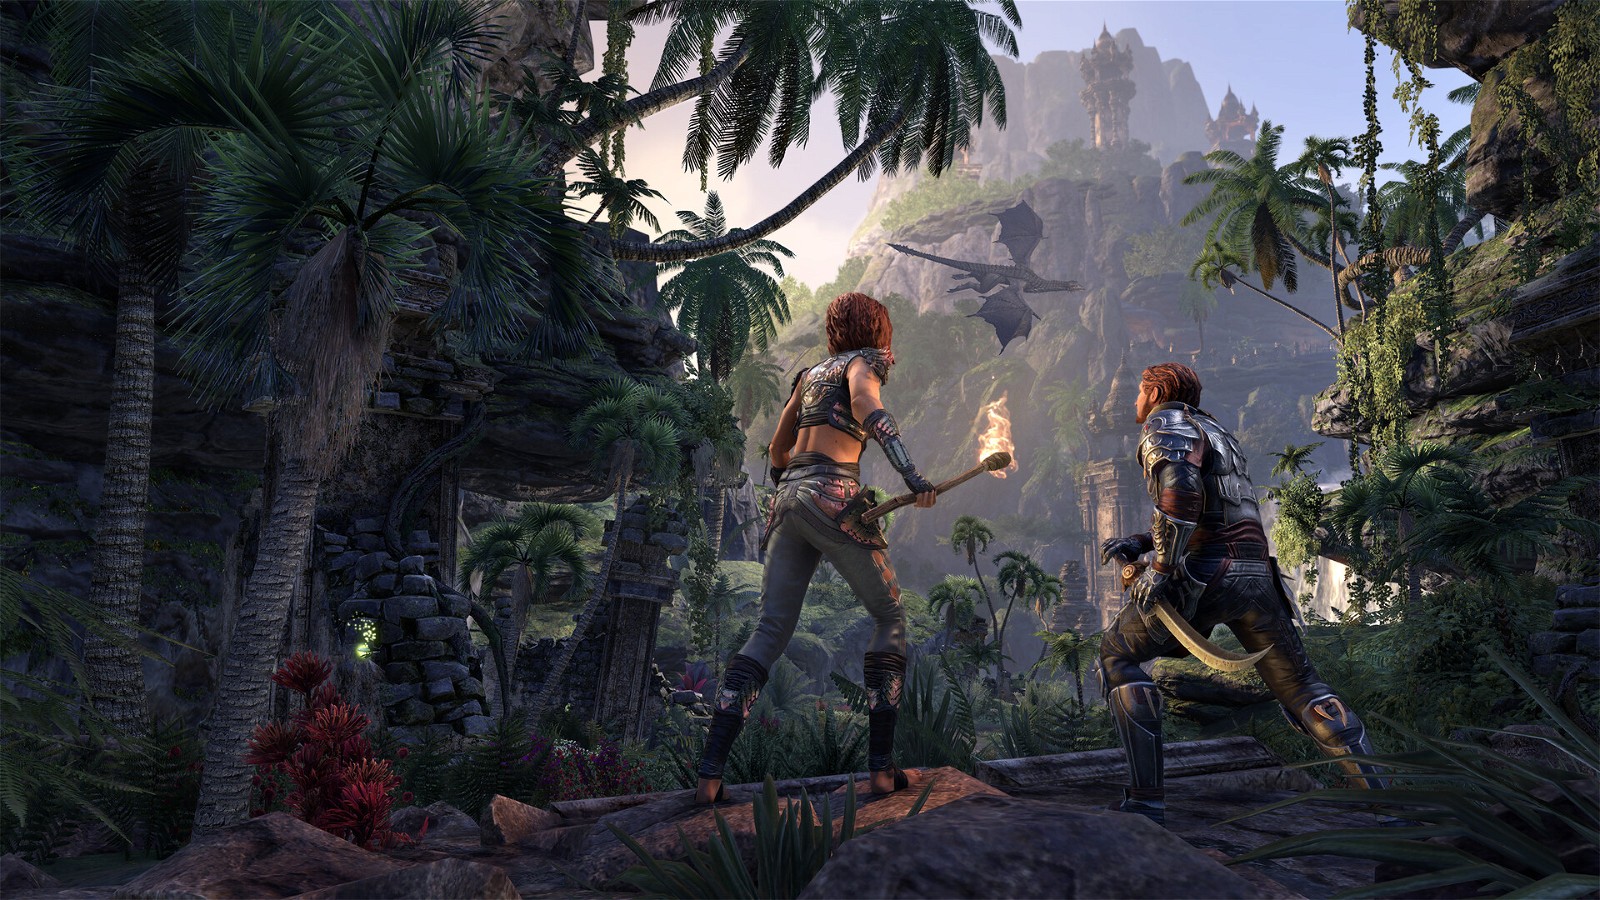 ESO's Director Matt Firor shared his thoughts on the matter and discussed the future of the game. Despite all the community's concern, Firor was confident in his game.